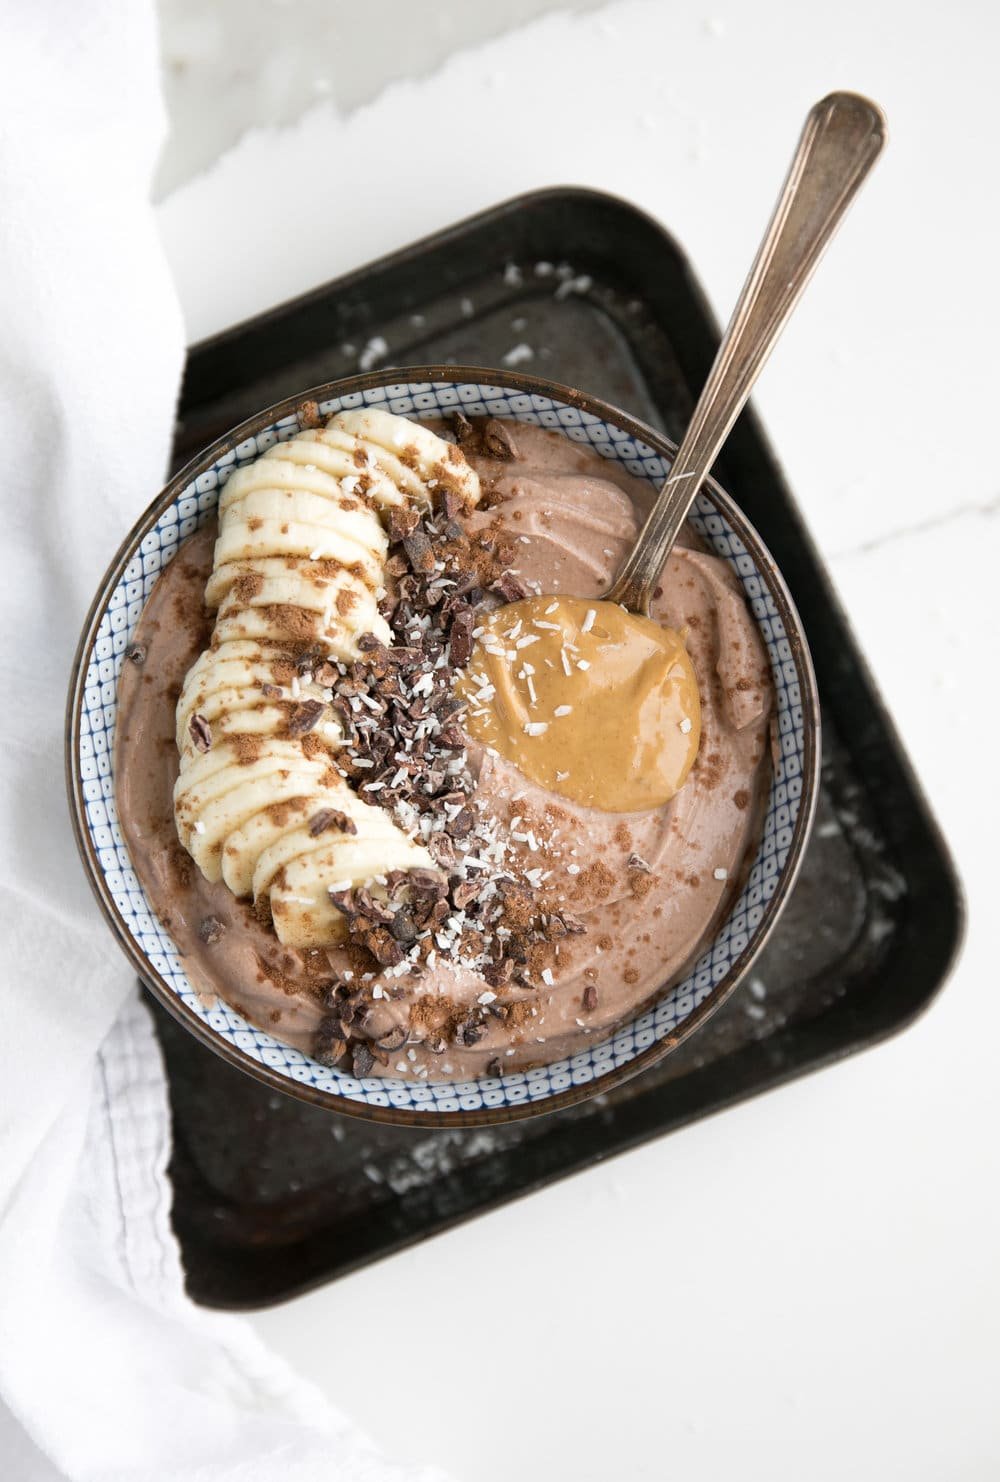 Cocoa Banana Yogurt with Coconut - The Forked Spoon